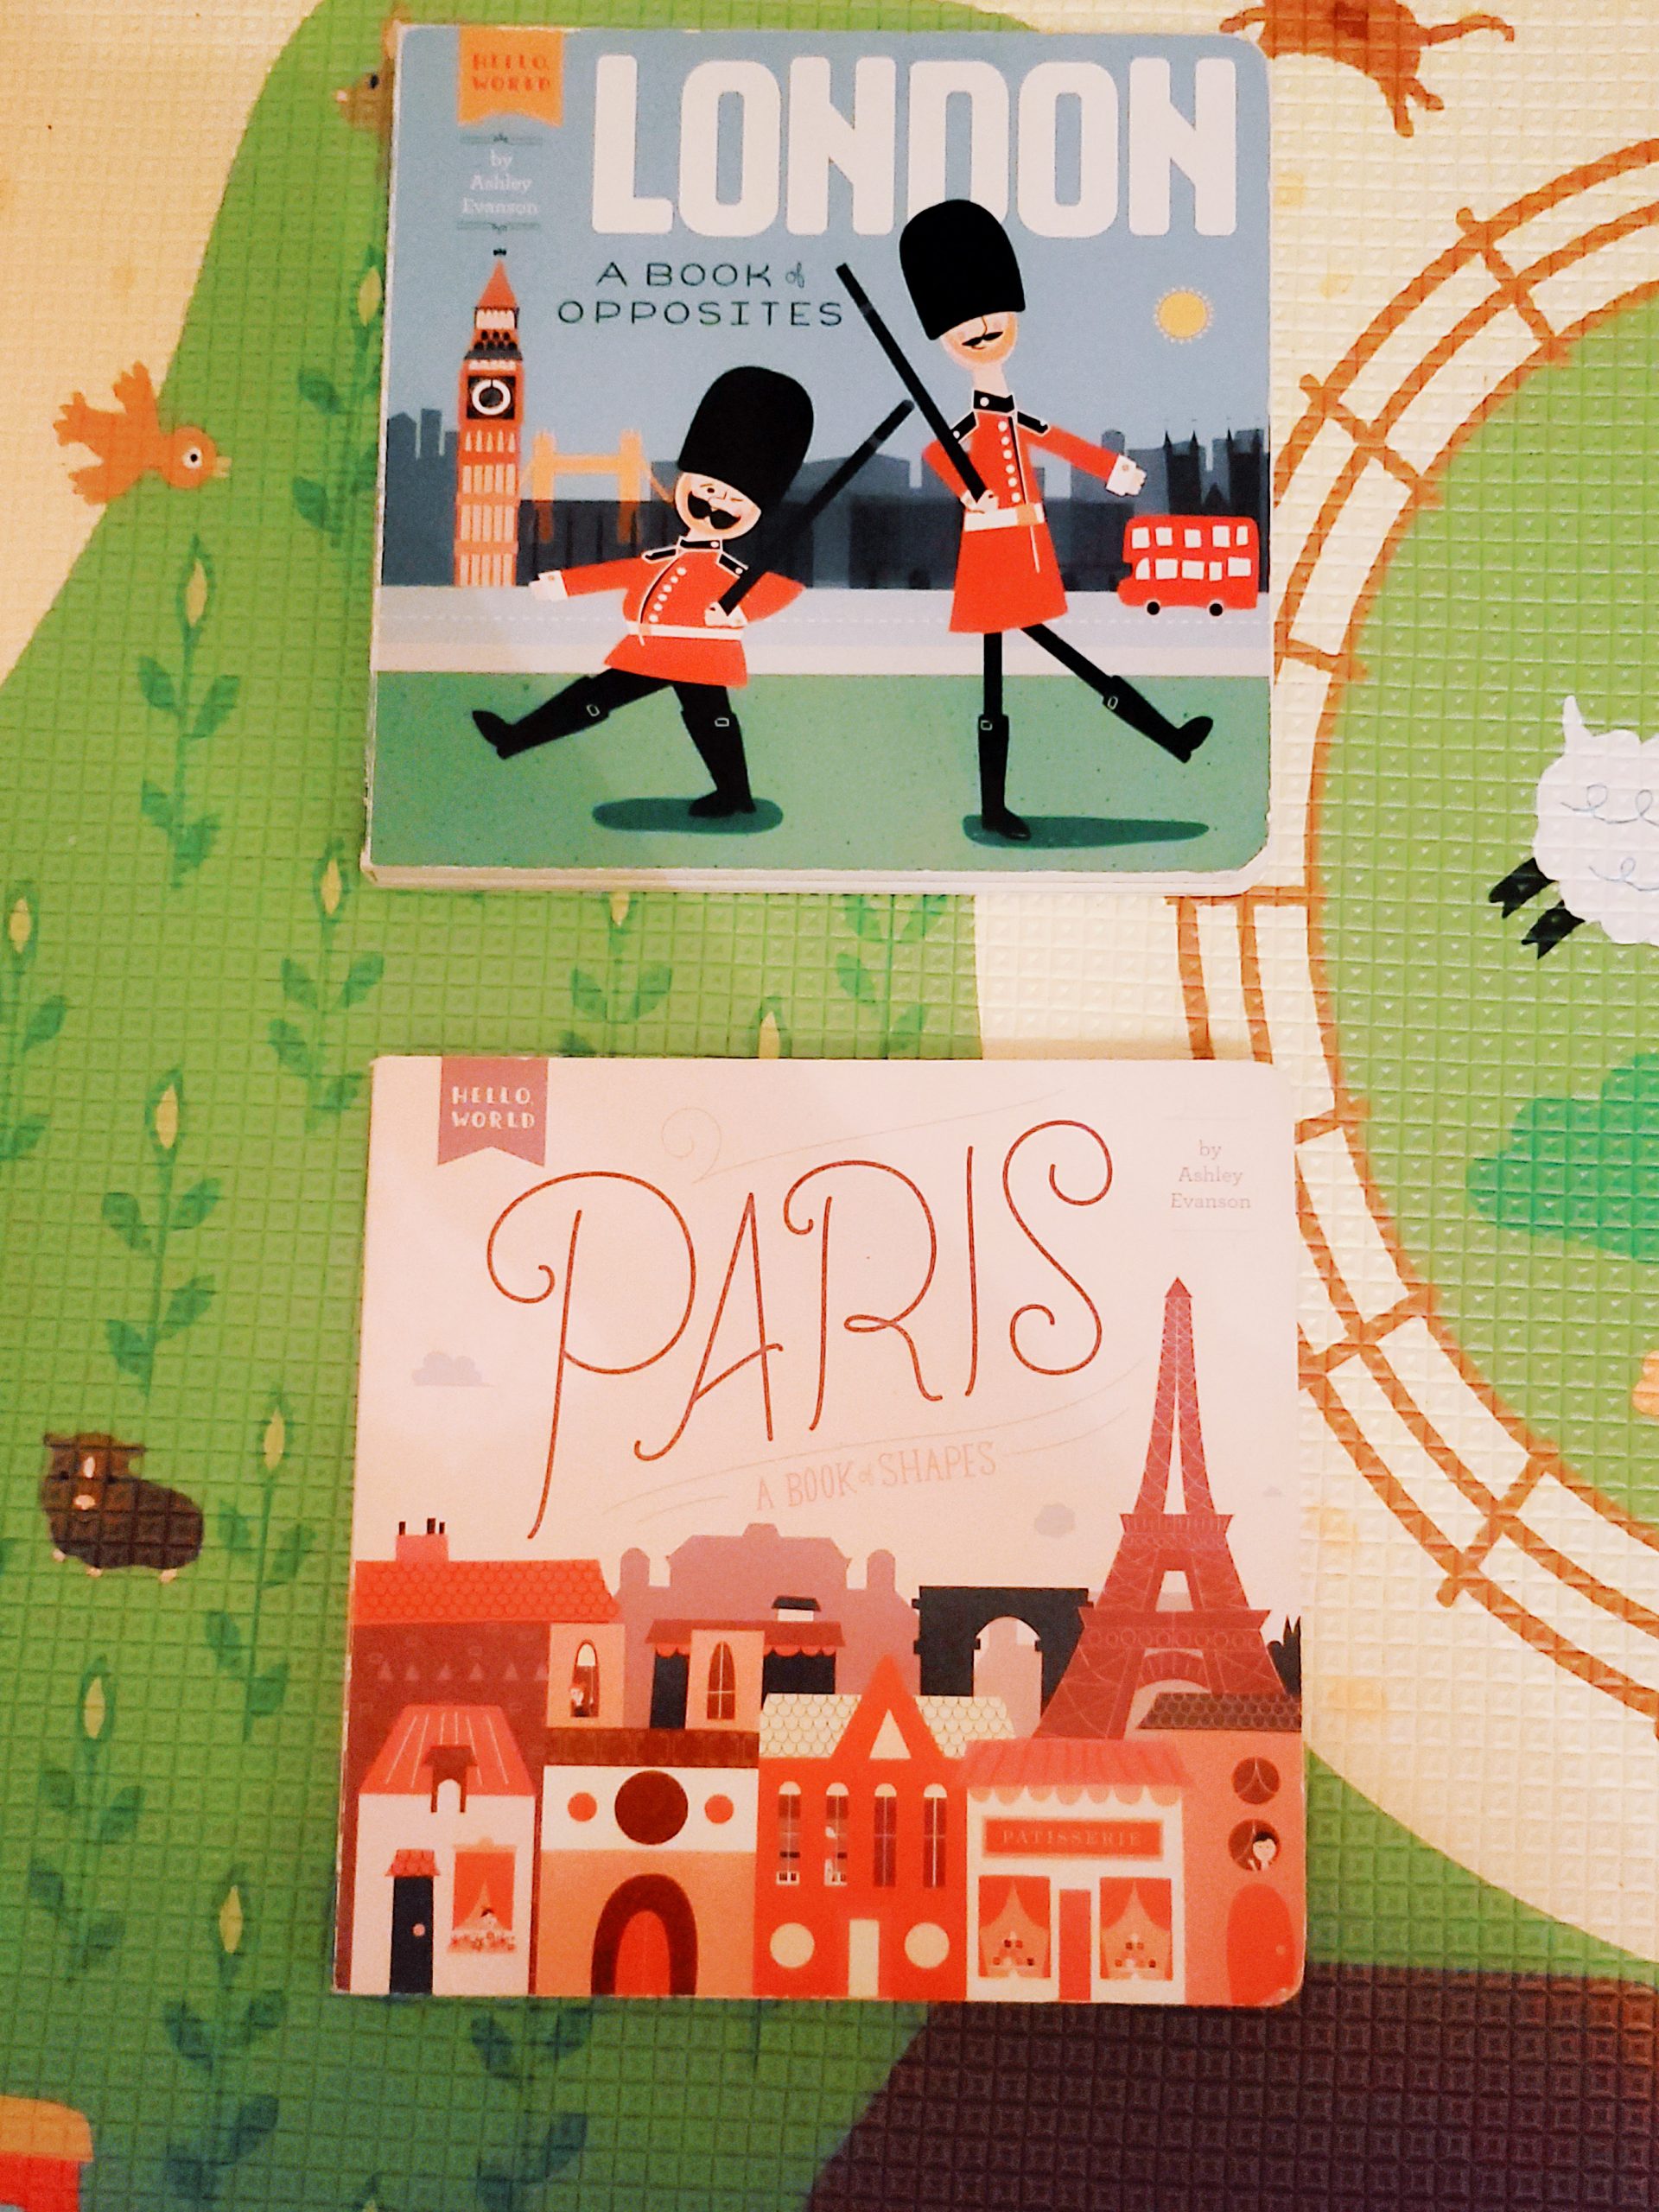 Perfect travel books for toddlers and babies to learn about London and Paris